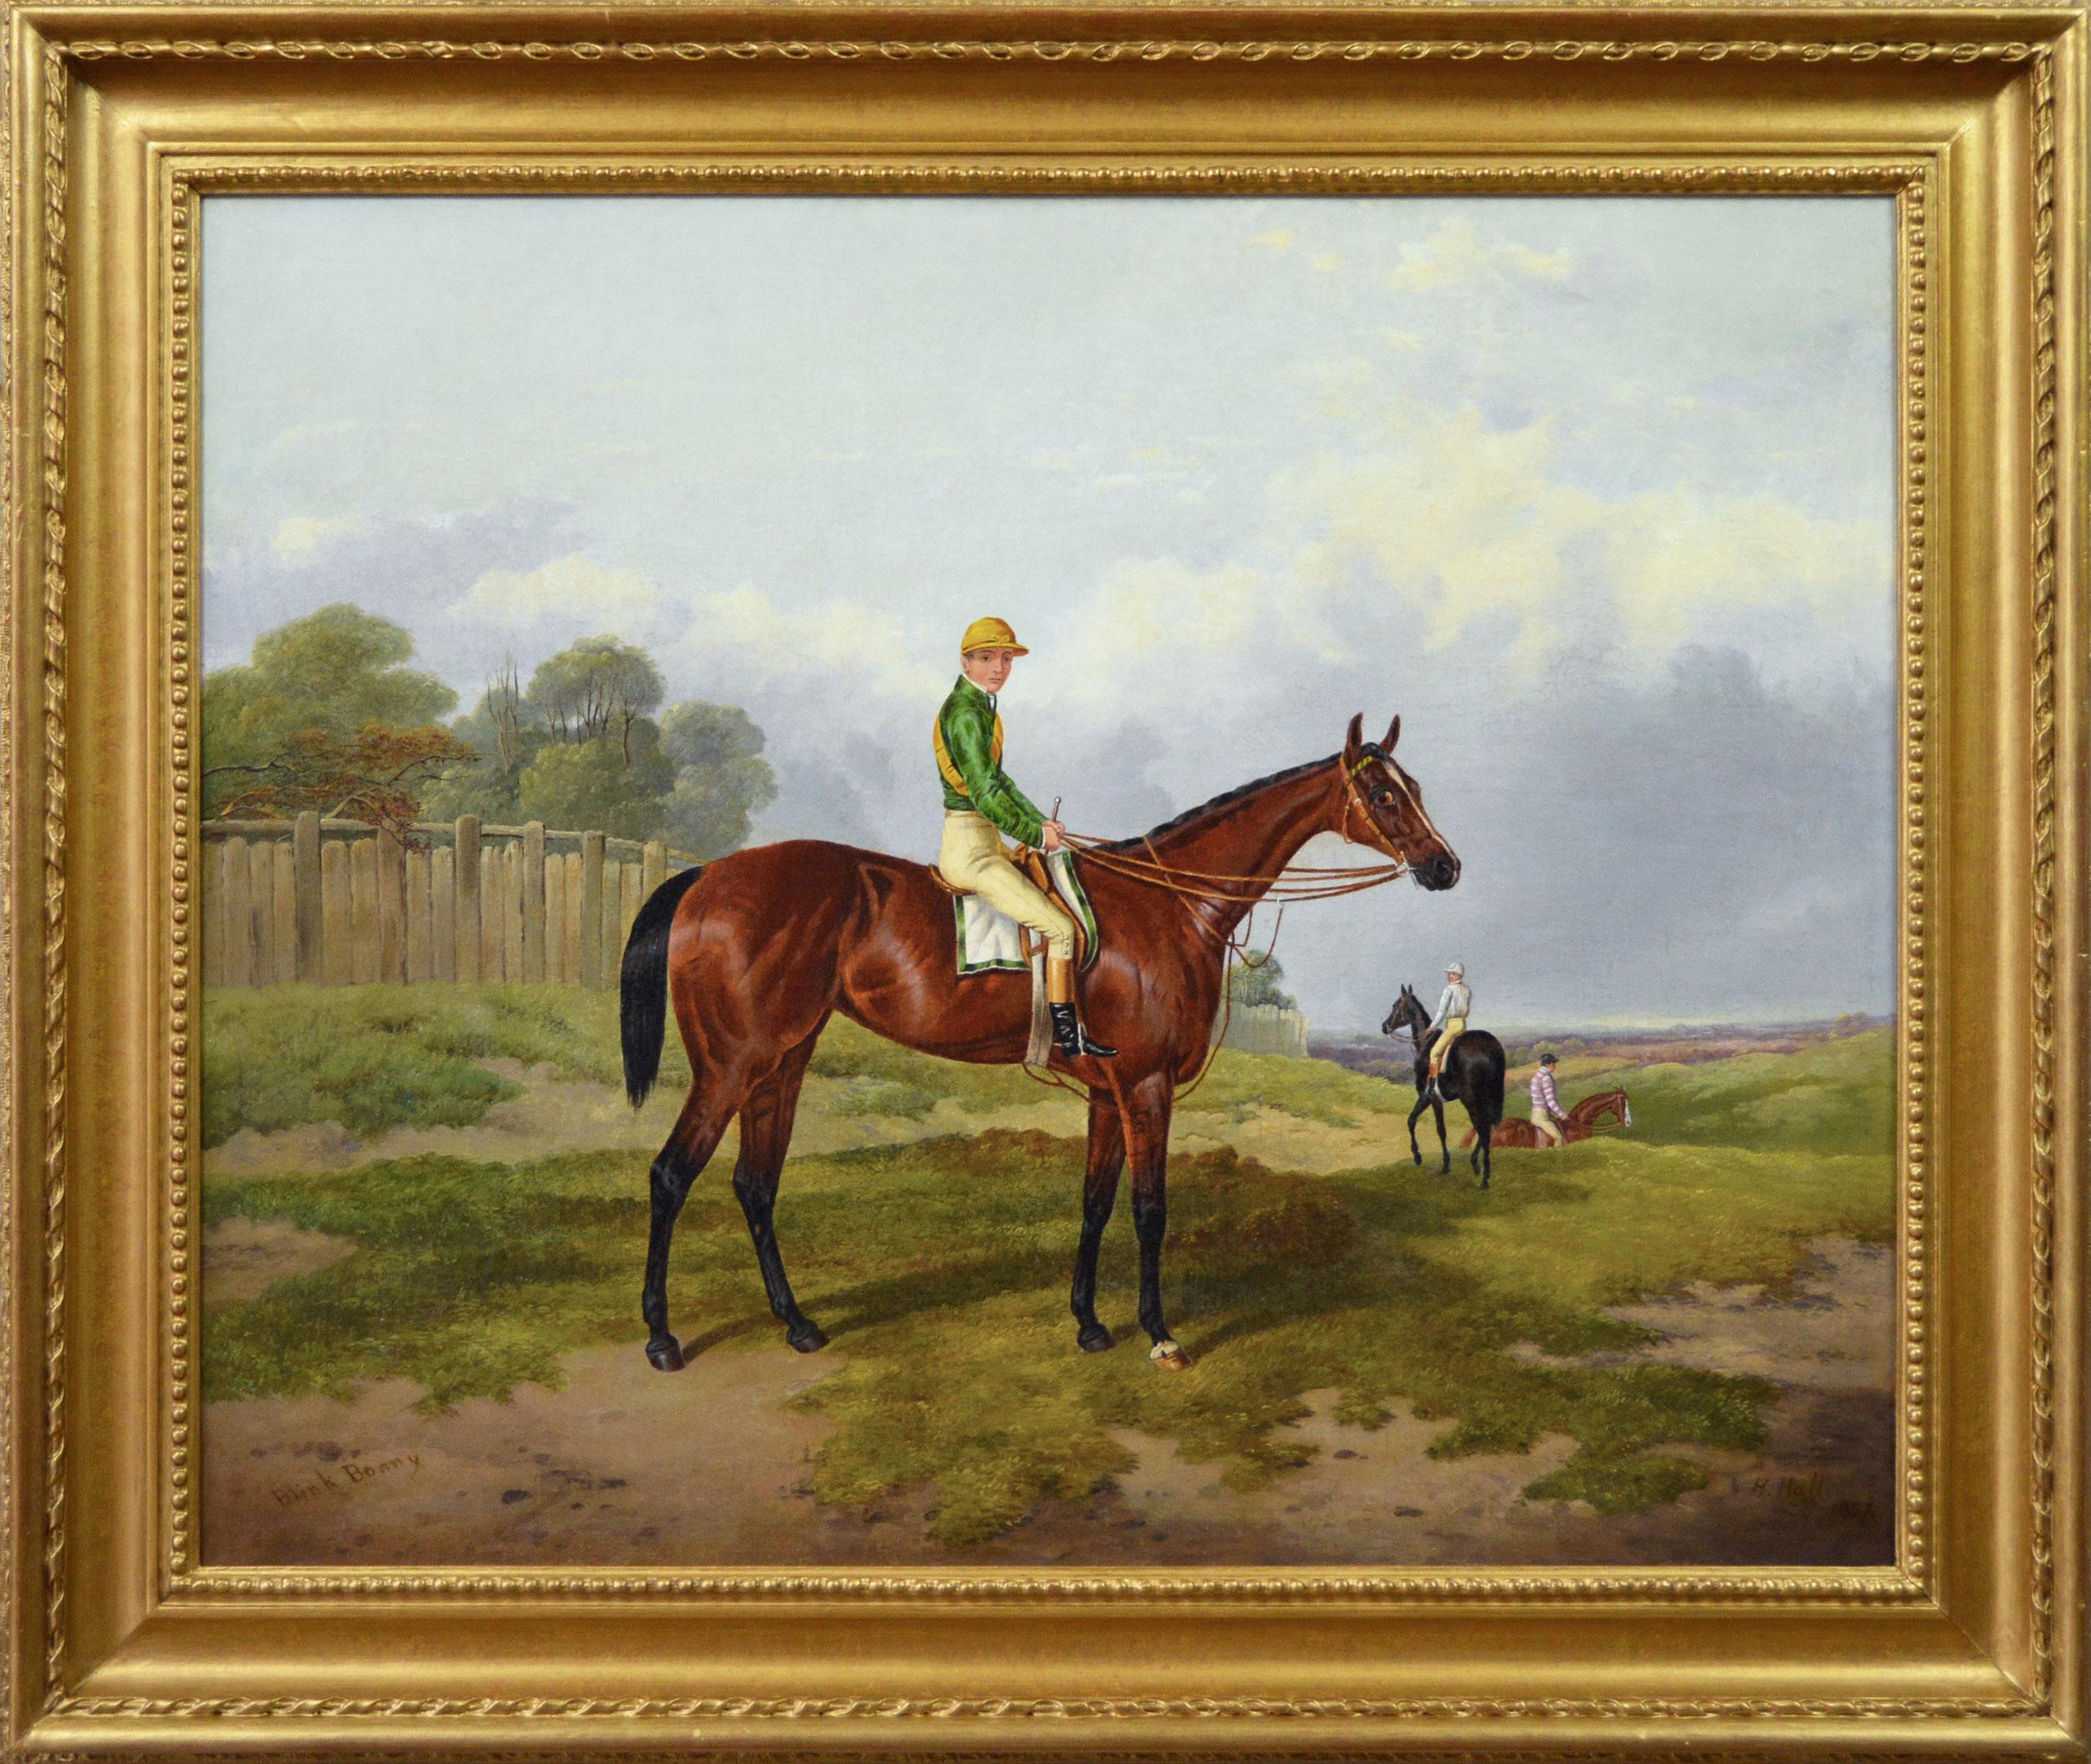 19th Century sporting horse portrait oil painting of the racehorse Blink Bonny